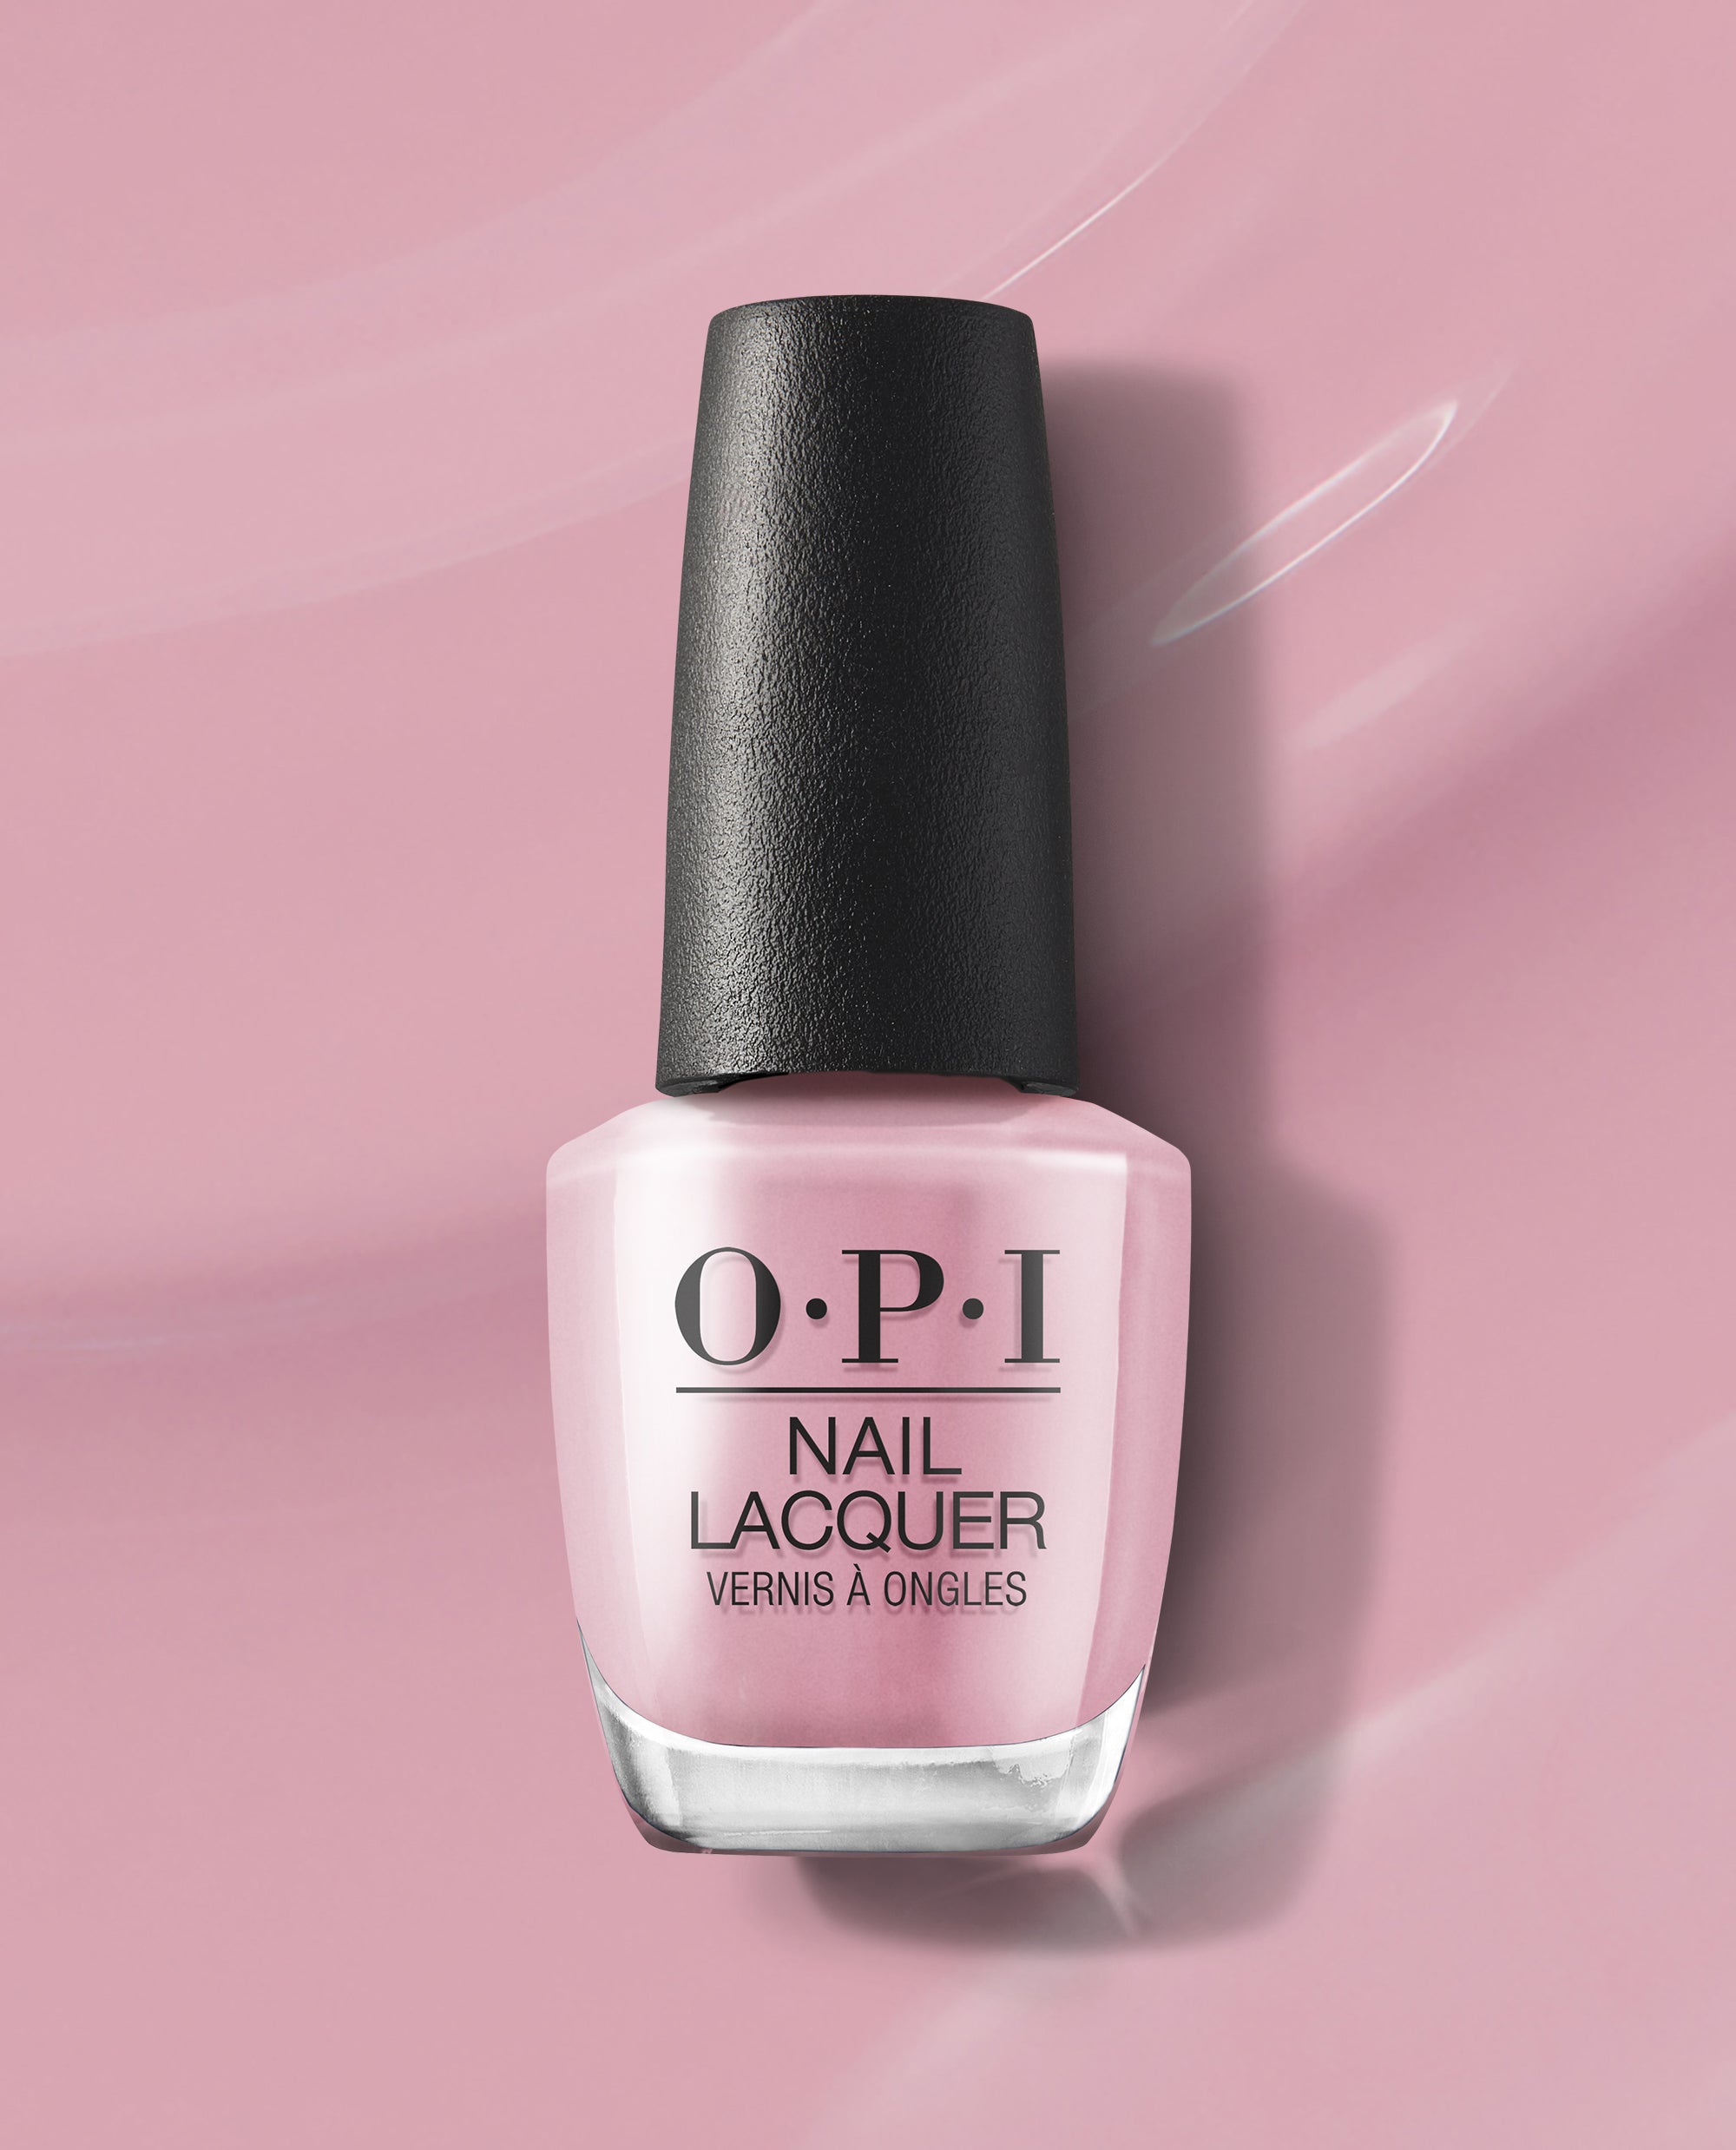 OPI Nail Lacquer NL LA 03 (P)ink on Canvas